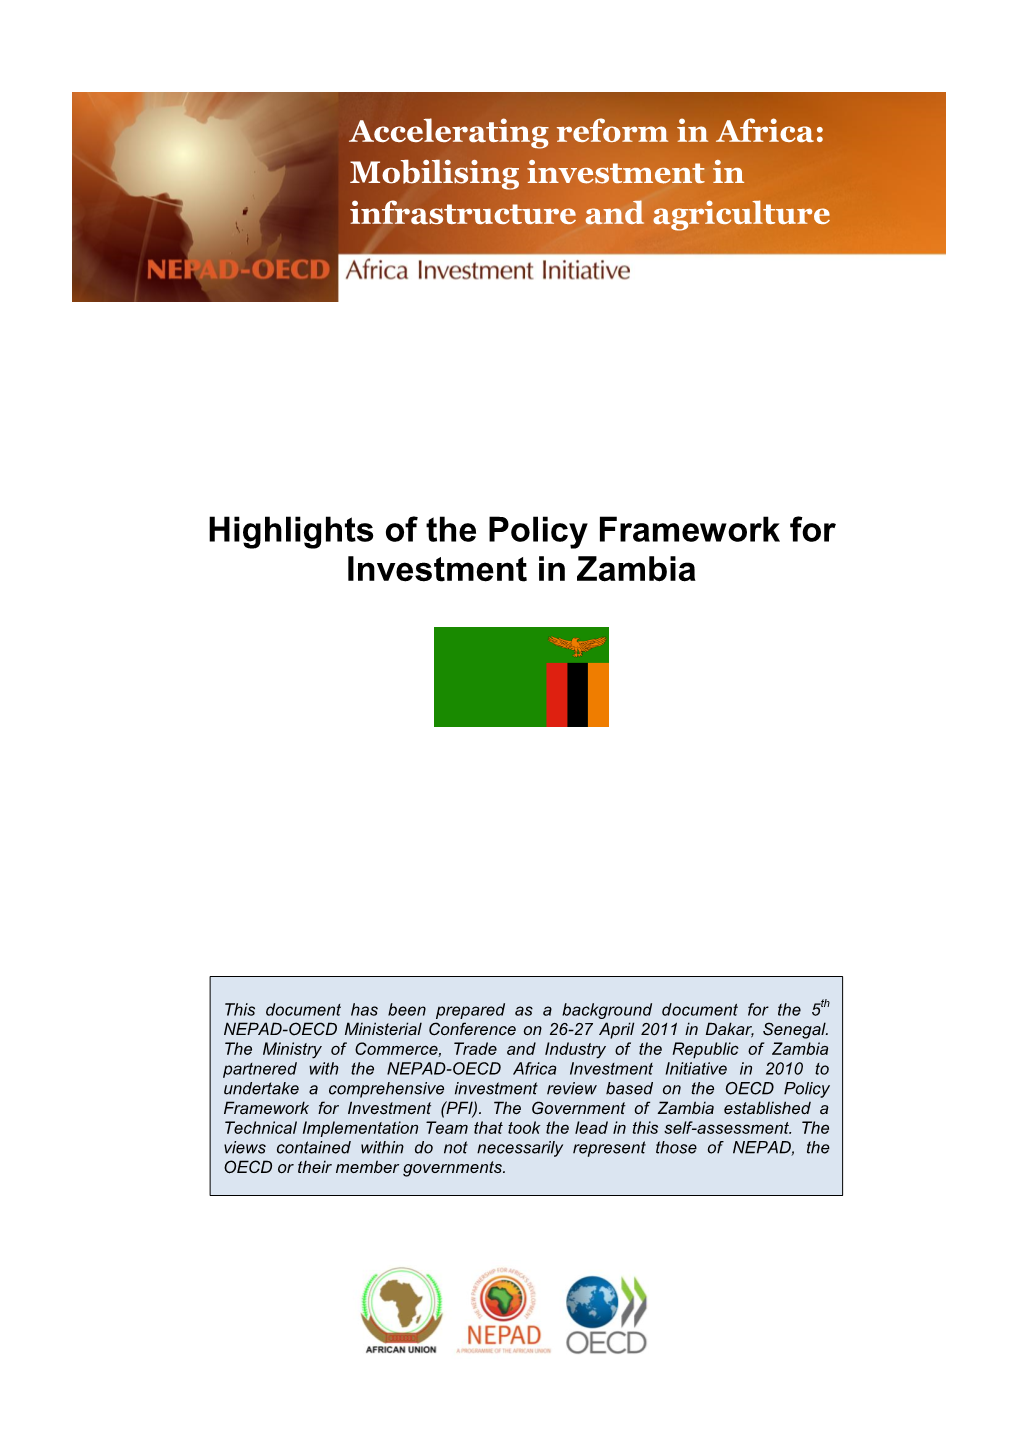 Zambia's Policy Framework for Investment